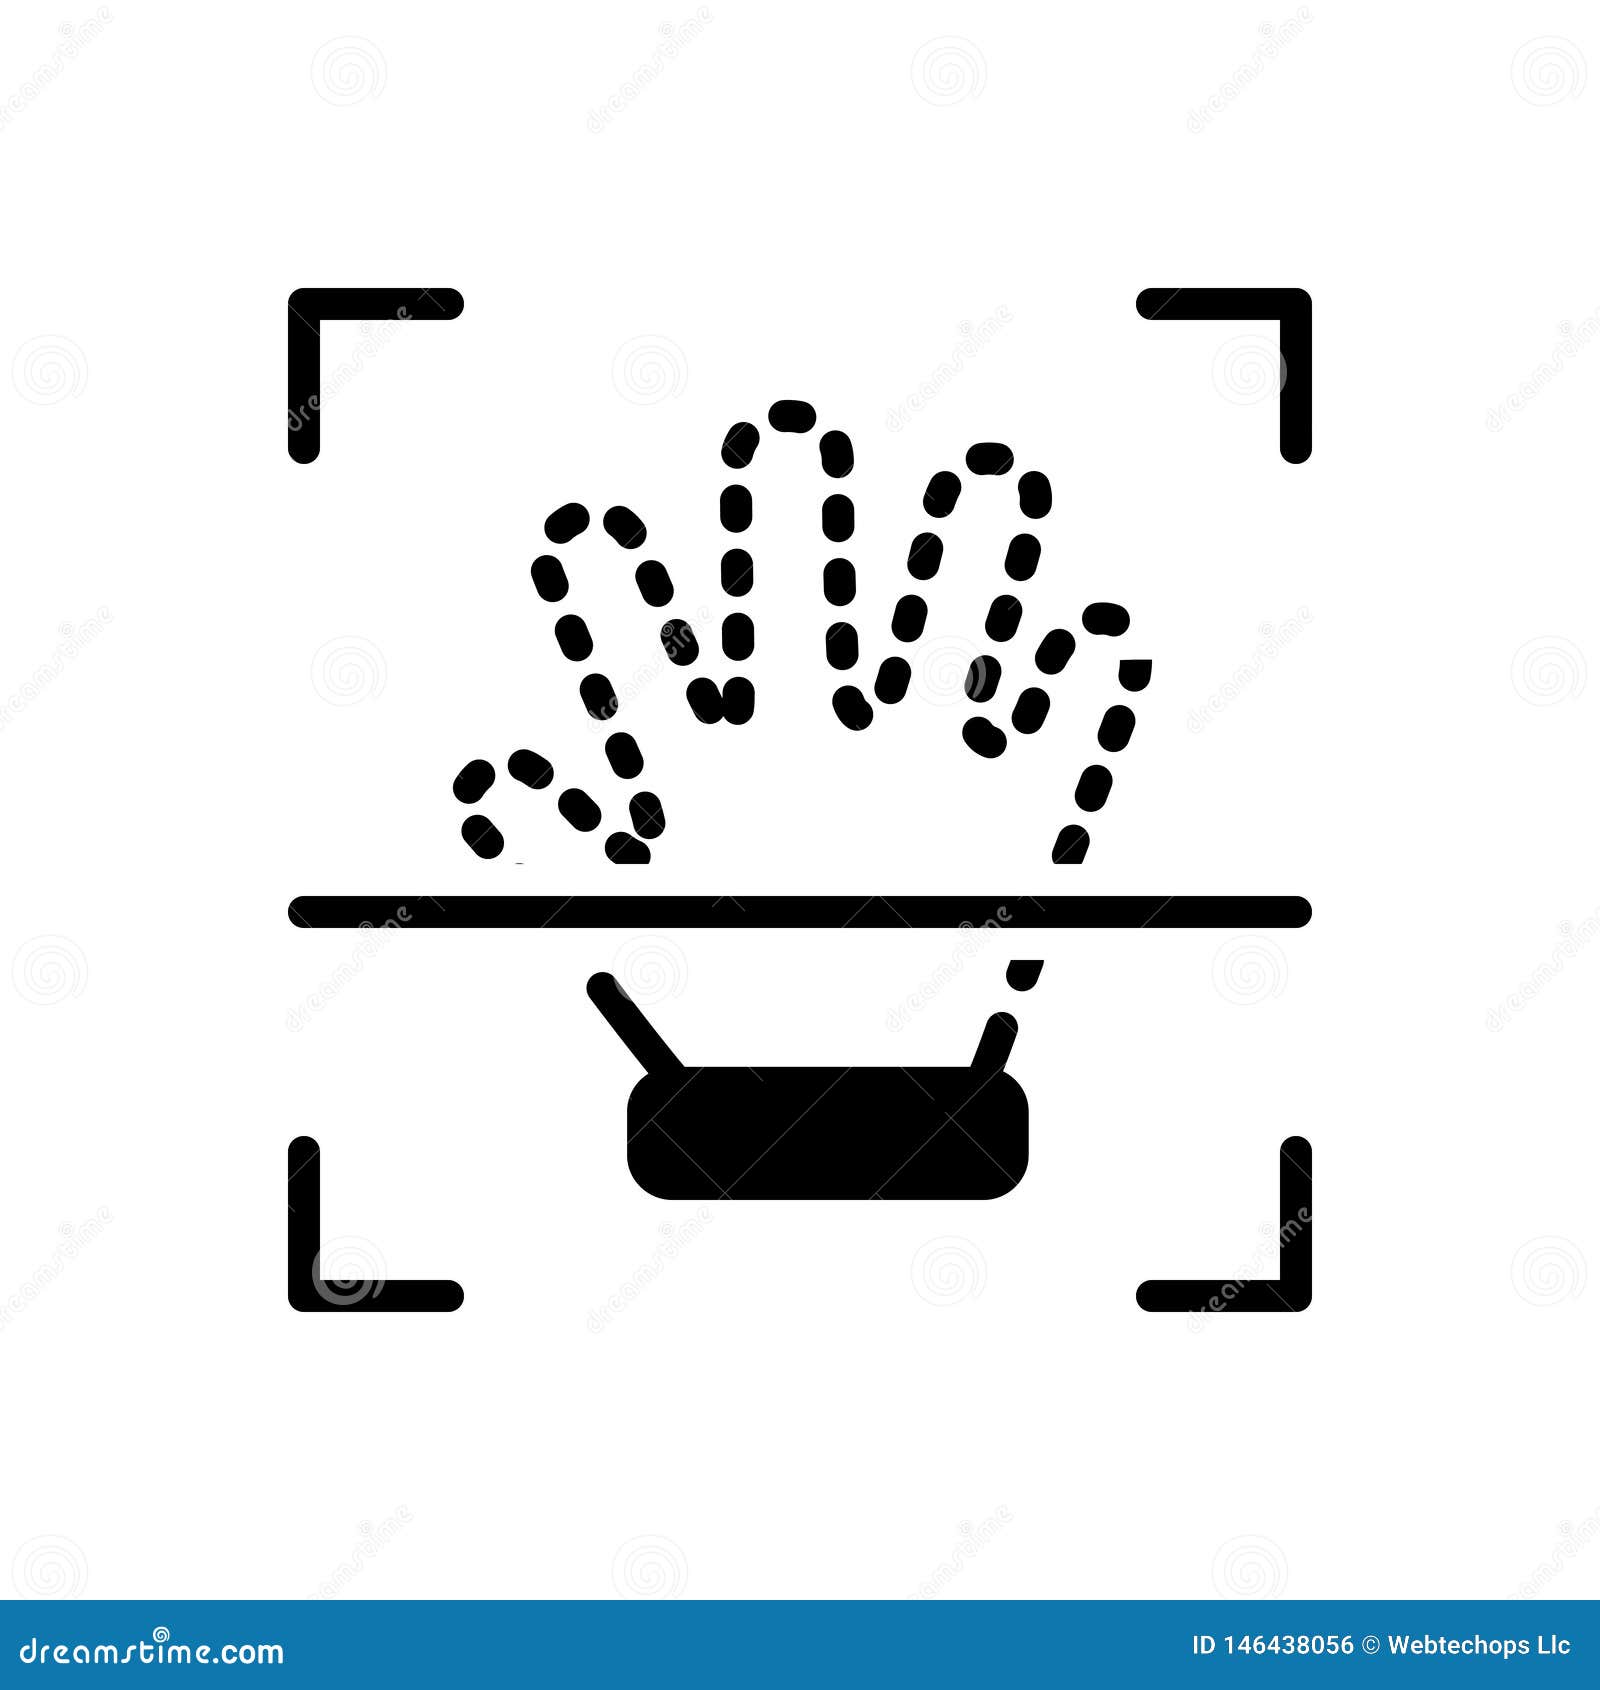 black solid icon for handprint, identity and creativity